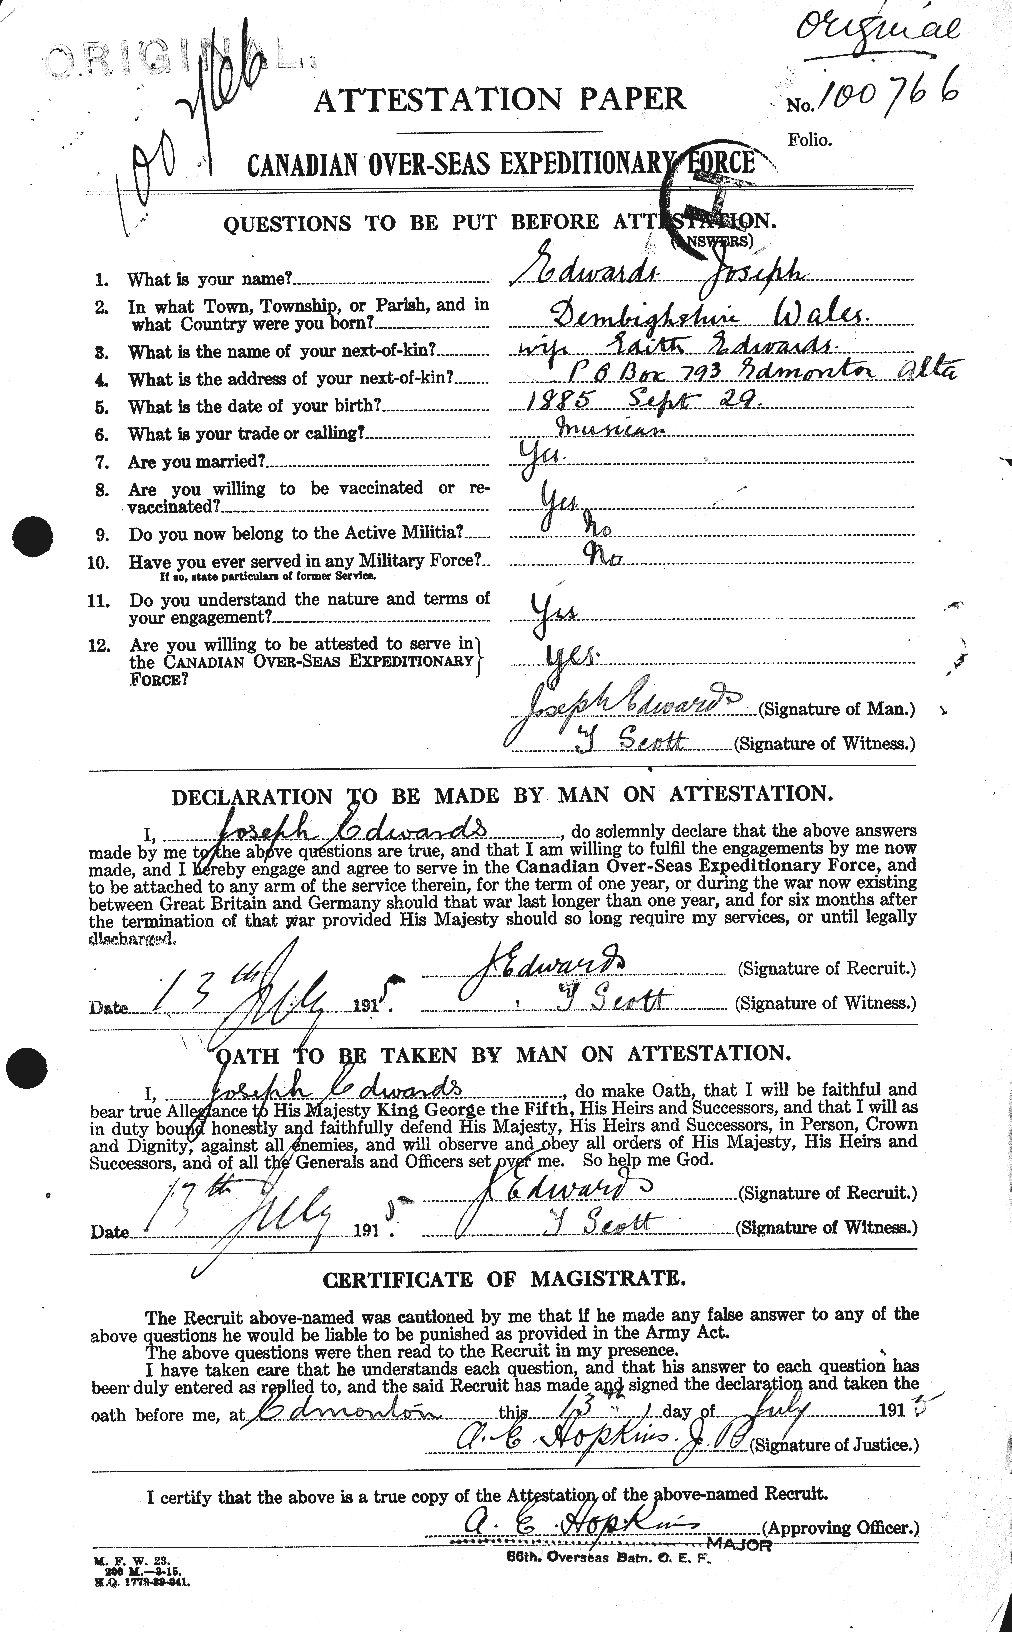 Personnel Records of the First World War - CEF 310170a